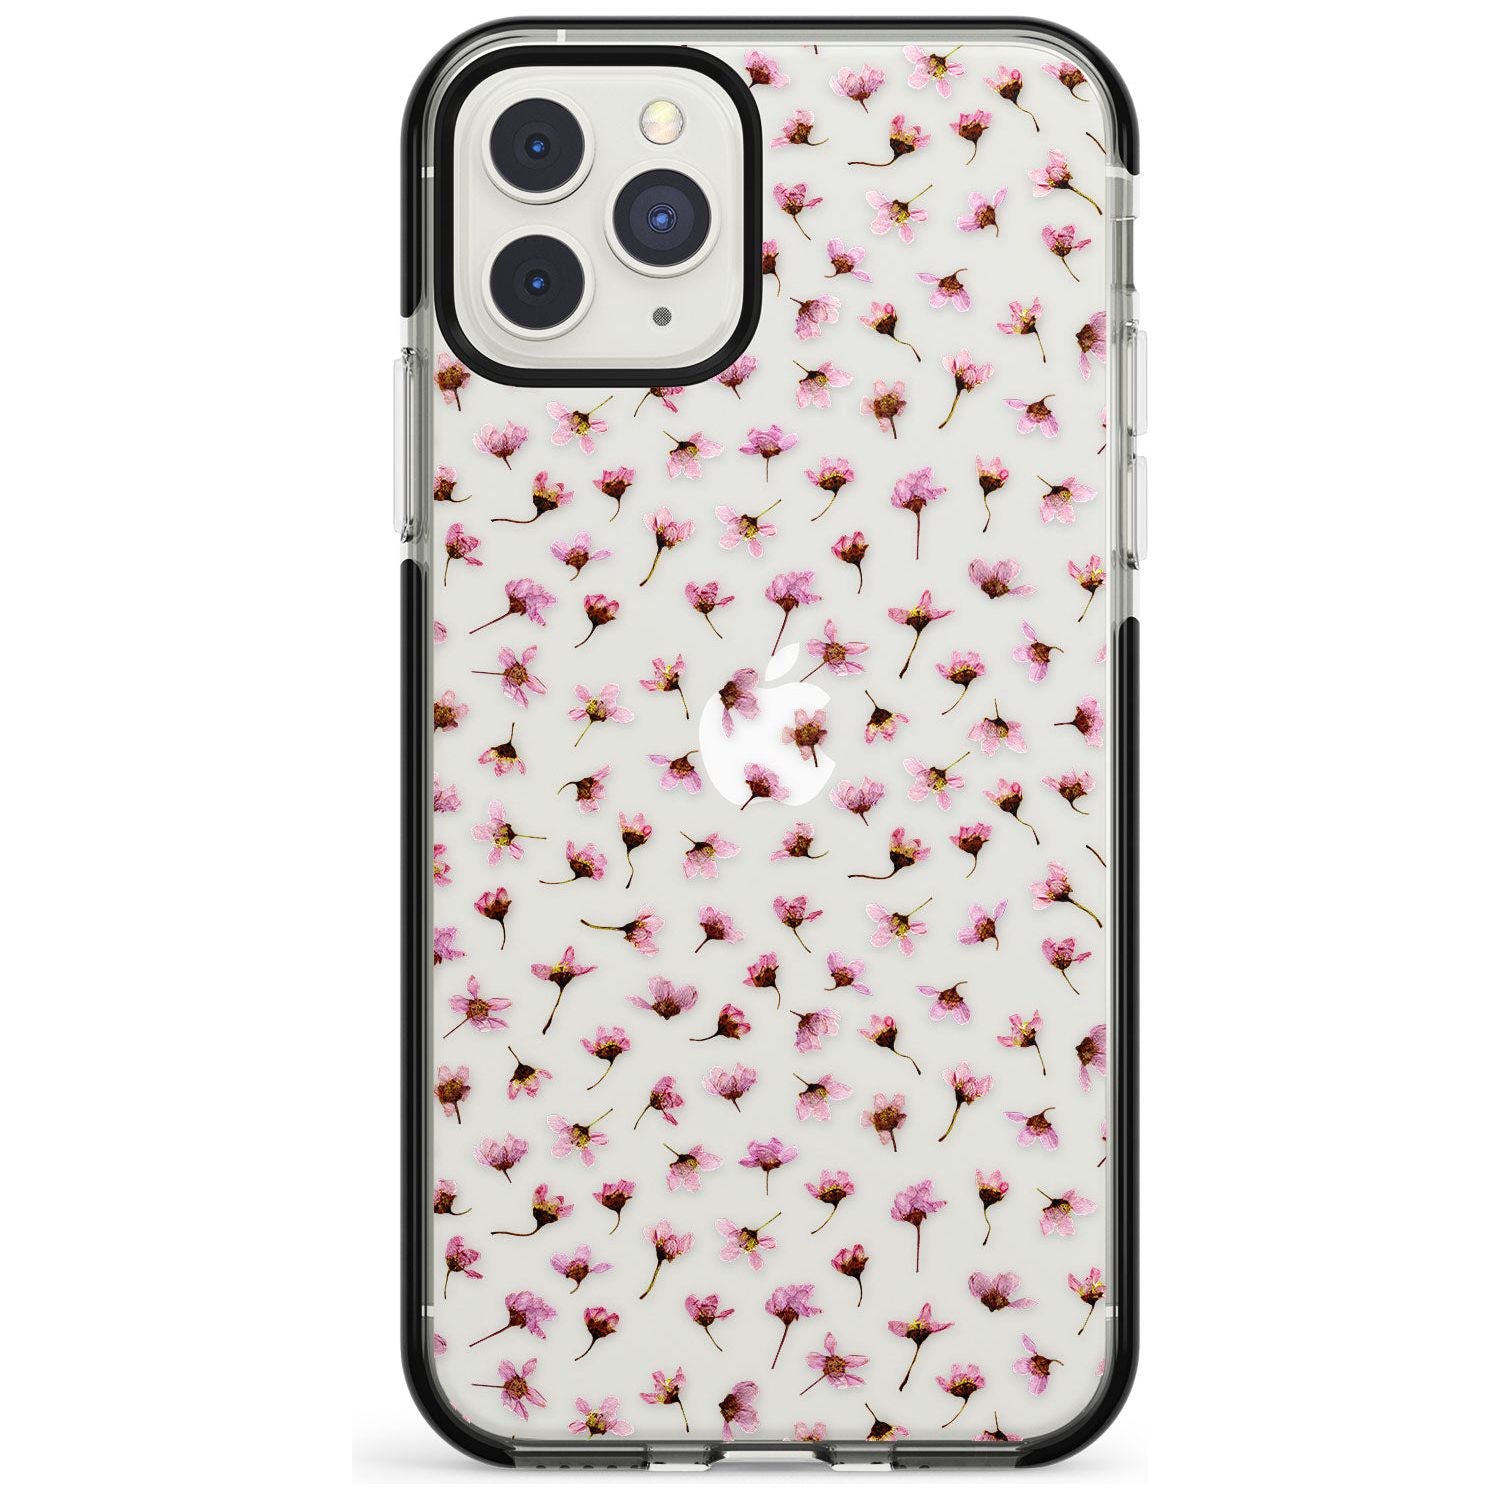 Small Pink Blossoms Transparent Design Black Impact Phone Case for iPhone 11 Pro Max